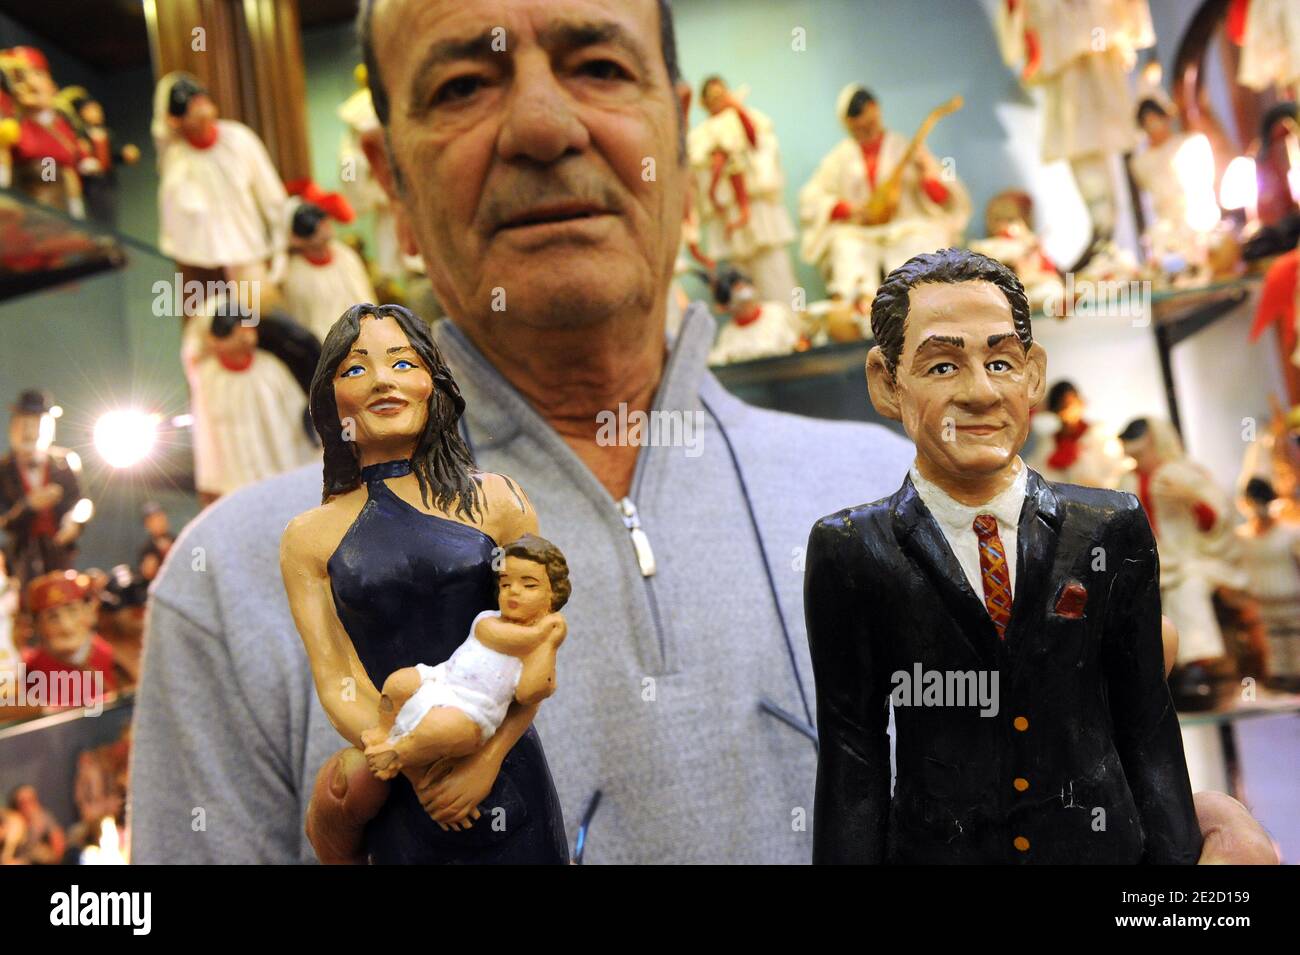 Artist Antonio Ferrigno shows statues of the french president Nicolas Sarkozy , his wife Carla Bruni and their new born baby in Via San Gregorio Armeno, in central Naples , Italy on october 19, 2011. The price is 300 Euros. Representations of topical characters ,celebrities, politicians...often show up in the crib, adding a humorous touch.In recent decades, artists and craftsmen of these shops have been making Neapolitan creches, pertaining to the southern Italian city of Naples, with statues of prominent figures placed near the nativity scenes.These statues portray the signs of the times, acc Stock Photo